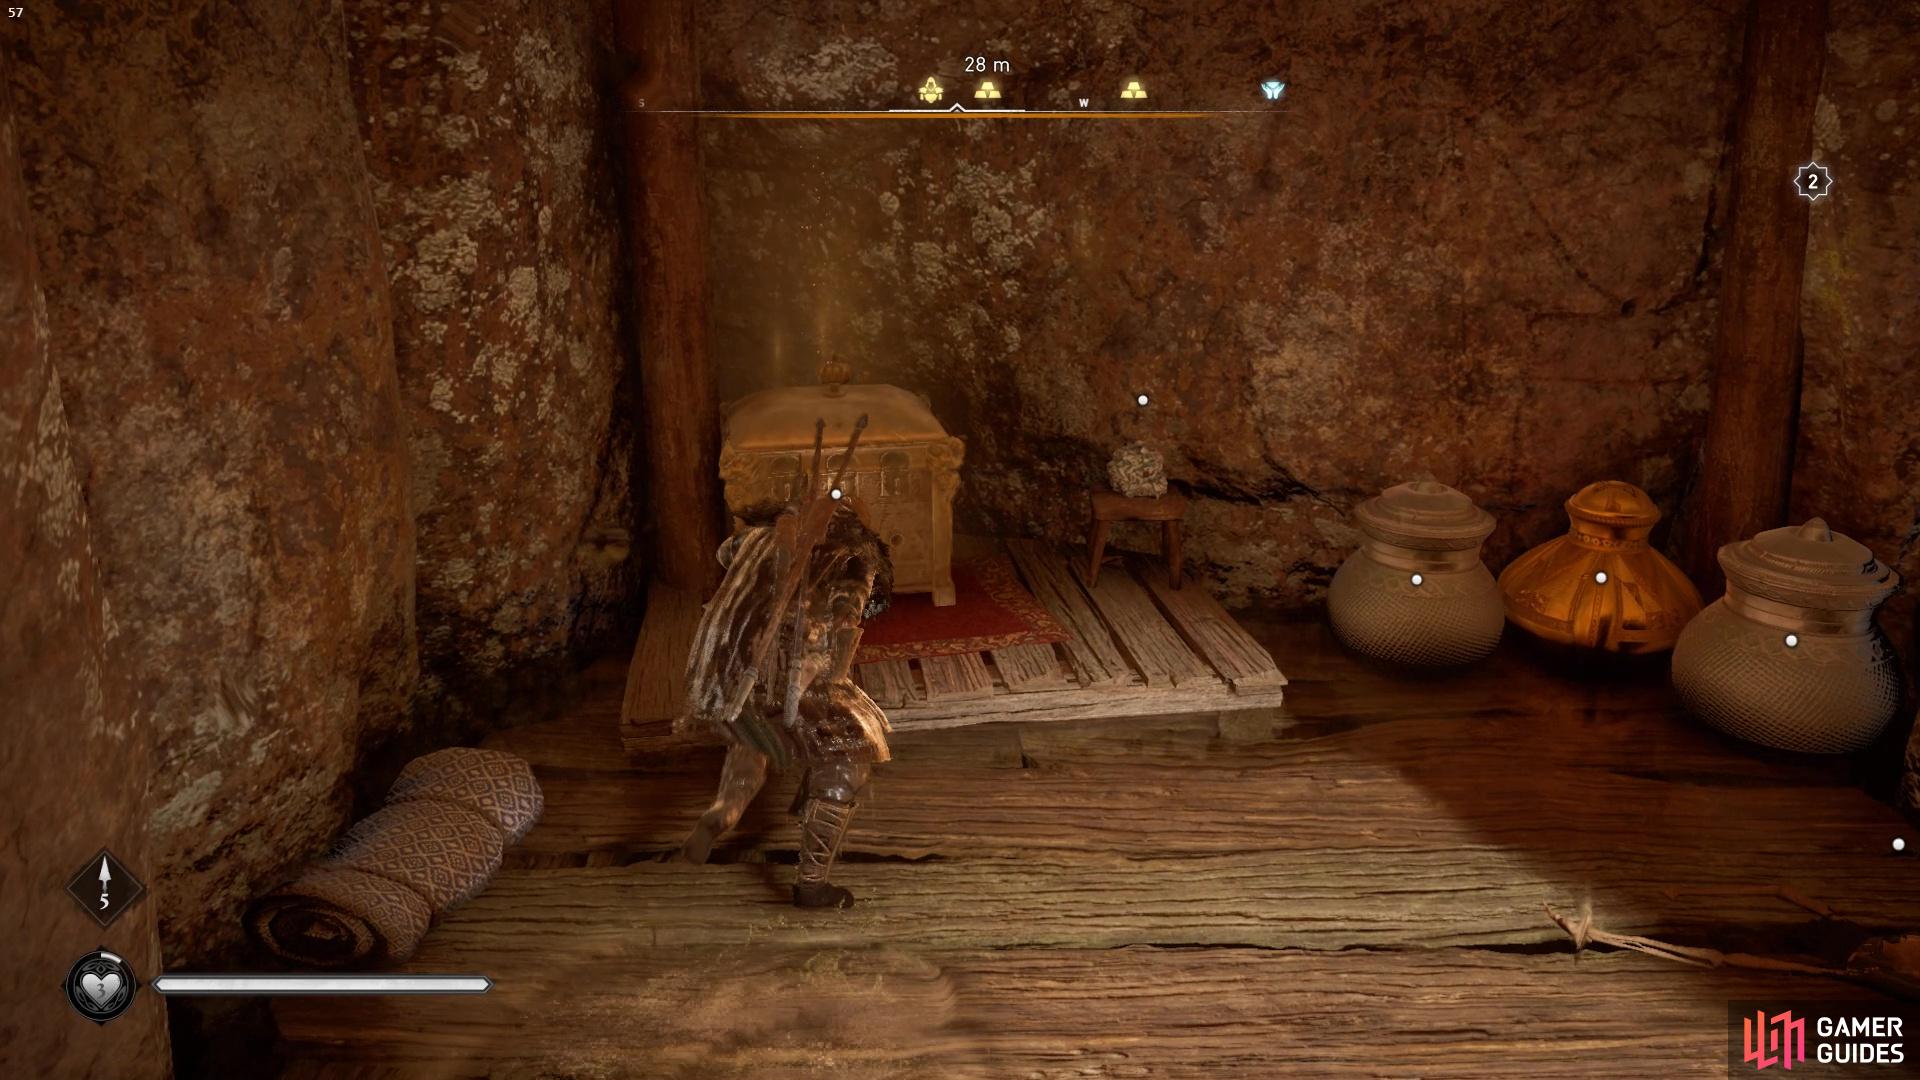 you'll find the Sarcophagus Shield in a secret room in the caves.